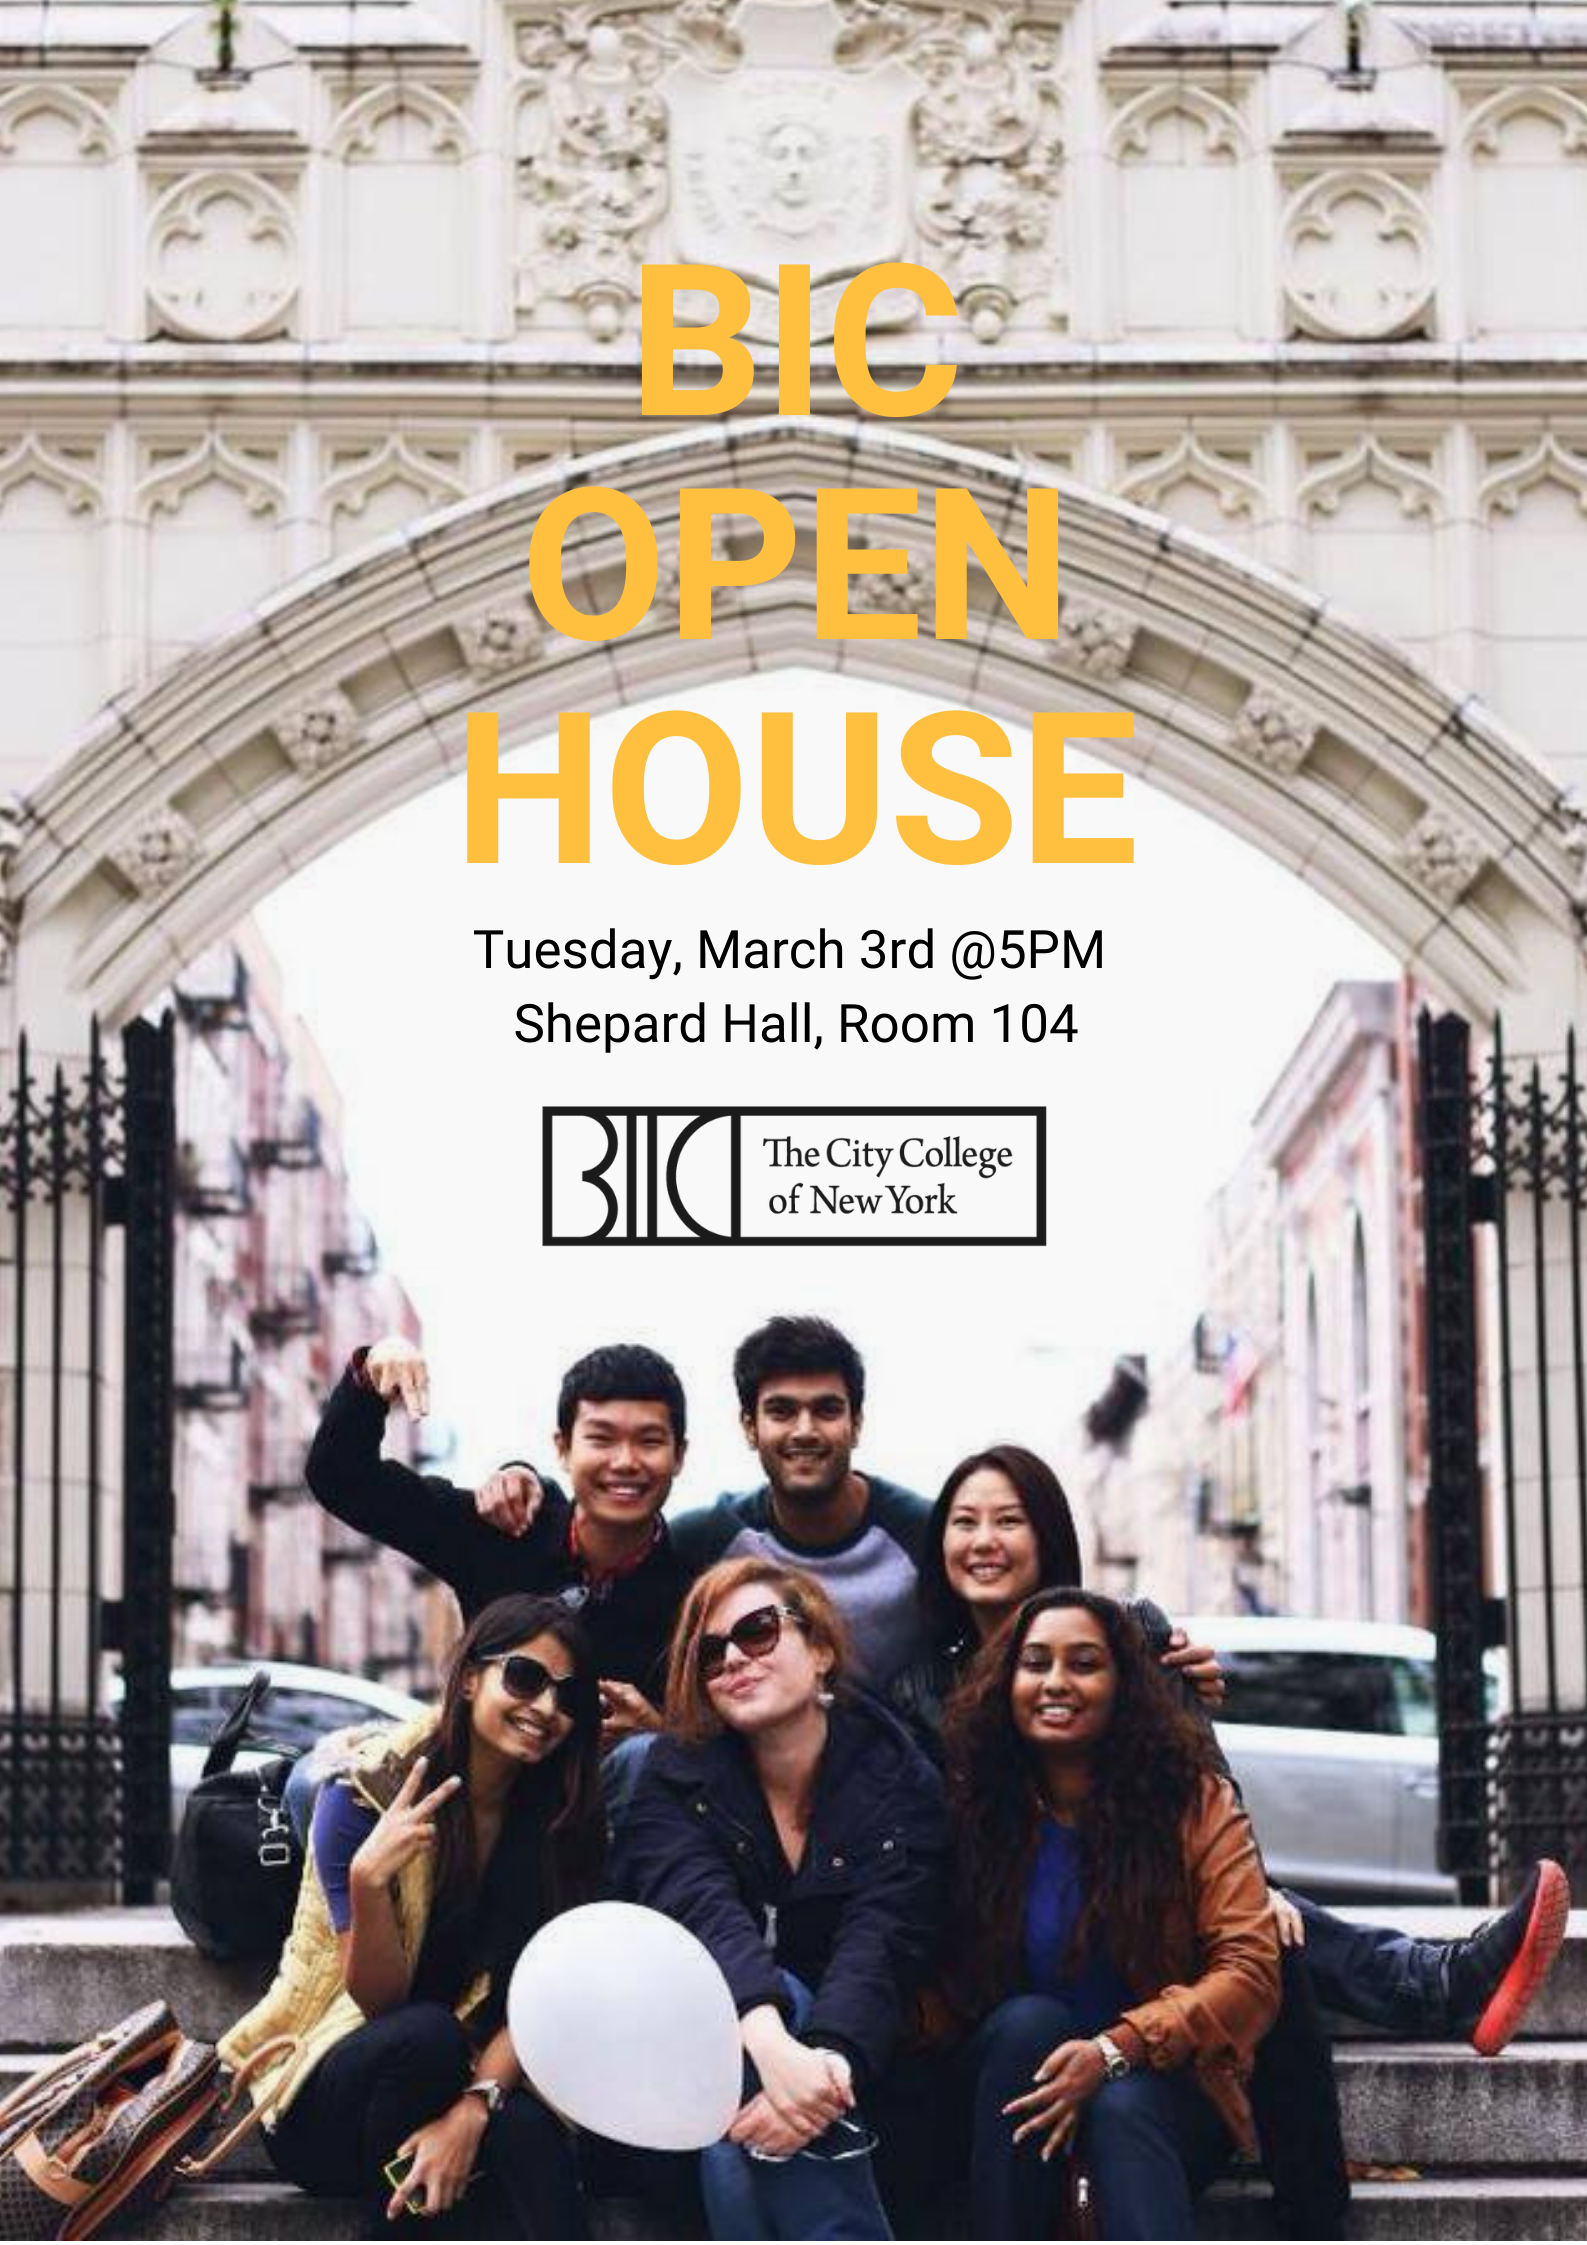 BIC Spring Open House Tuesday March 3rd 5pm